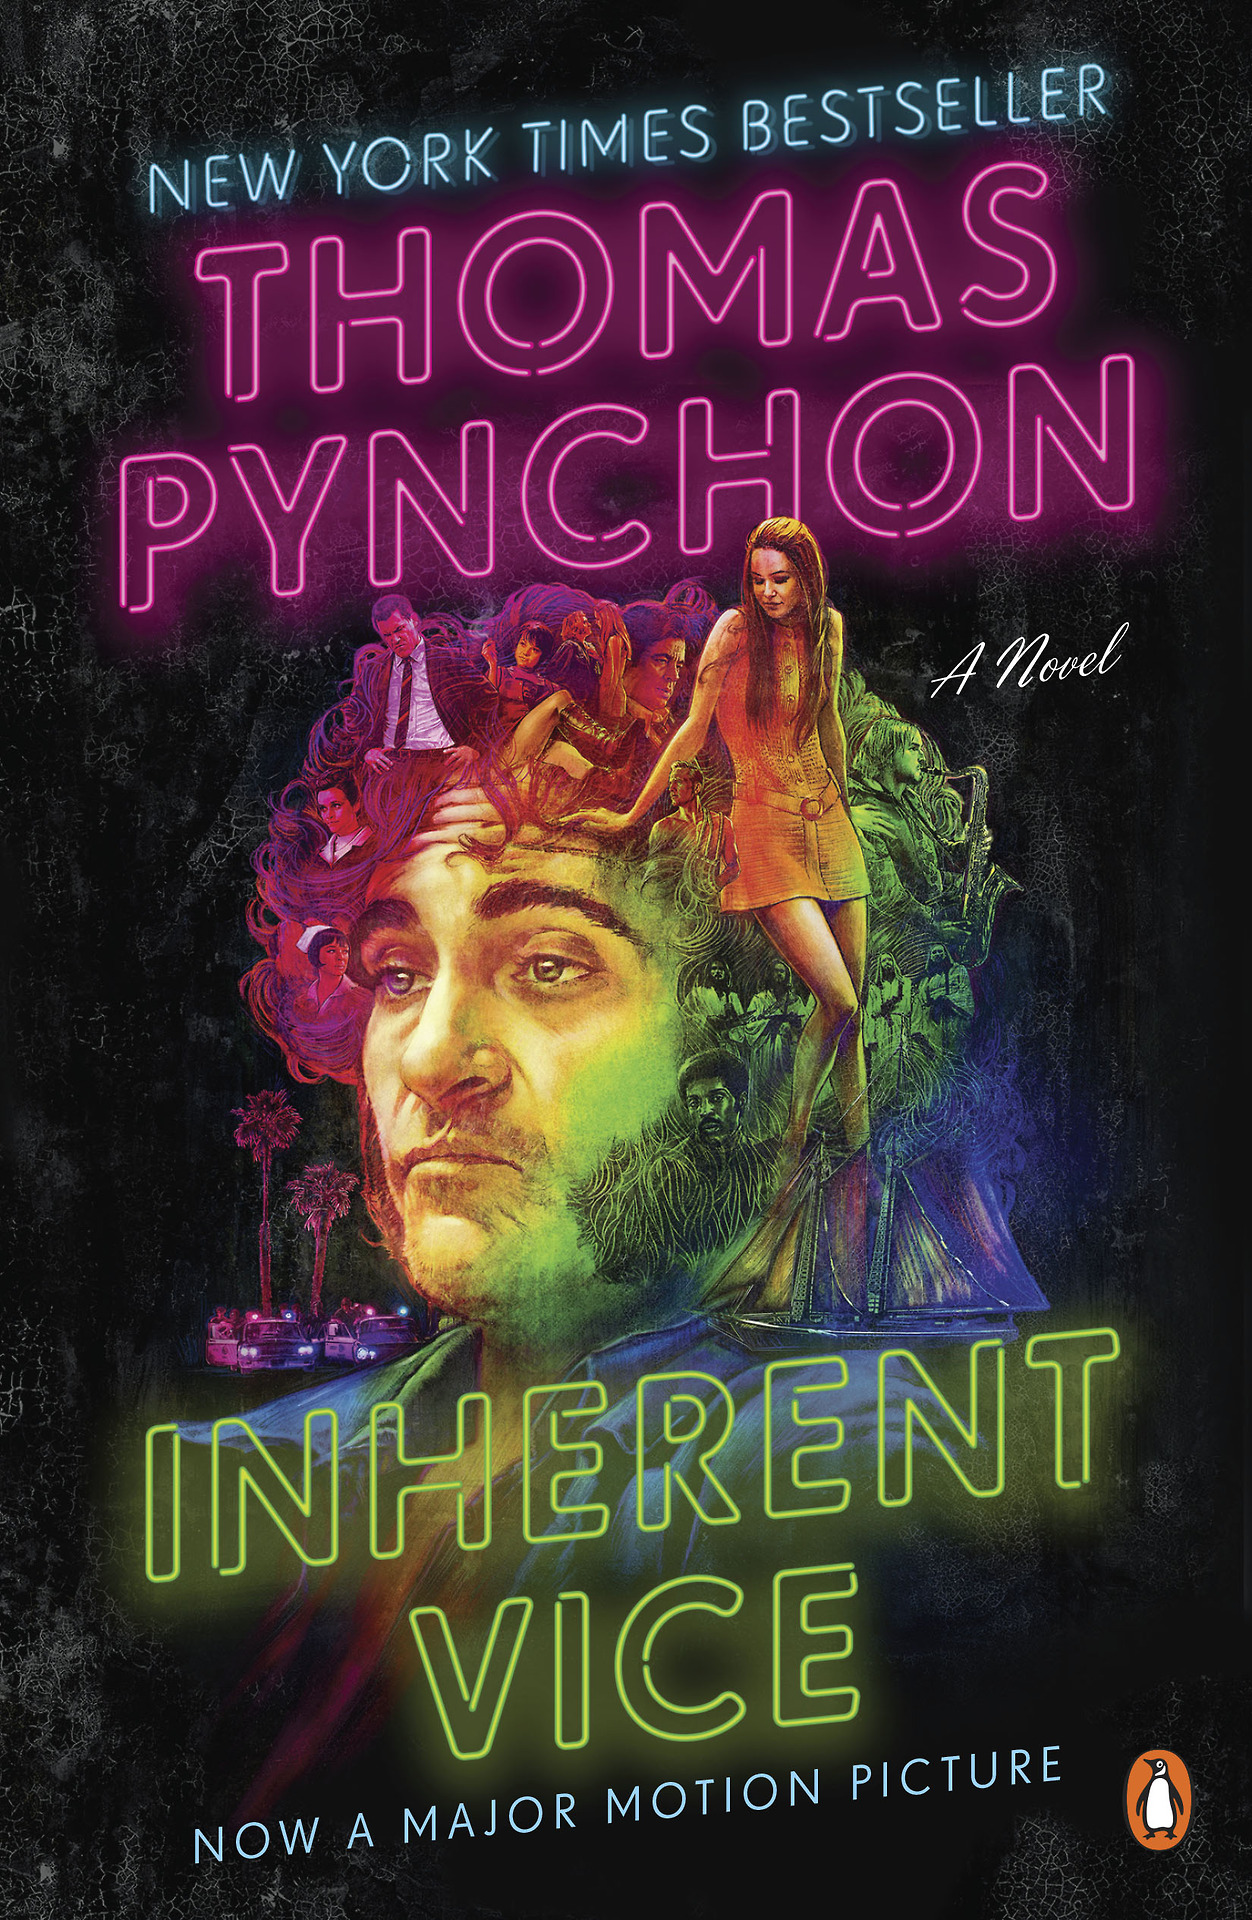 Listen: Paul Thomas Anderson Talks 'Inherent Vice' and More In One-Hour Conversation1252 x 1920